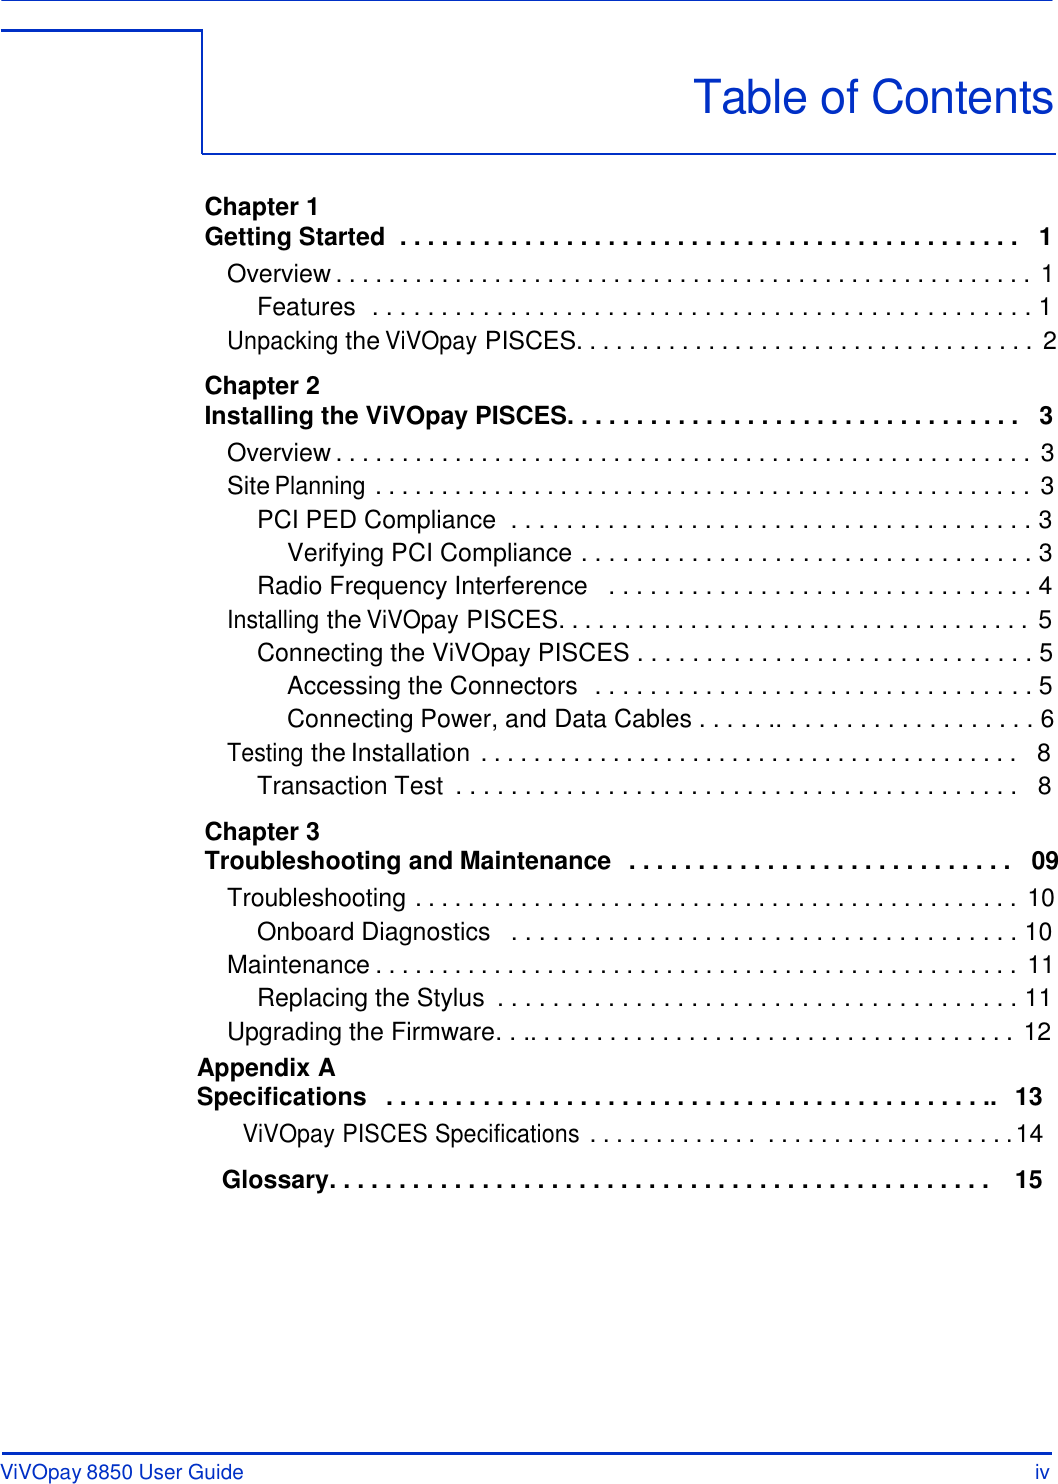 ViVOpay 8850 User Guide iv      Table of Contents    Chapter 1 Getting Started  . . . . . . . . . . . . . . . . . . . . . . . . . . . . . . . . . . . . . . . . . . . . .   1 Overview . . . . . . . . . . . . . . . . . . . . . . . . . . . . . . . . . . . . . . . . . . . . . . . . . . . . . 1 Features  . . . . . . . . . . . . . . . . . . . . . . . . . . . . . . . . . . . . . . . . . . . . . . . . 1 Unpacking the ViVOpay PISCES. . . . . . . . . . . . . . . . . . . . . . . . . . . . . . . . . . . 2  Chapter 2 Installing the ViVOpay PISCES. . . . . . . . . . . . . . . . . . . . . . . . . . . . . . . . .   3 Overview . . . . . . . . . . . . . . . . . . . . . . . . . . . . . . . . . . . . . . . . . . . . . . . . . . . . . 3 Site Planning . . . . . . . . . . . . . . . . . . . . . . . . . . . . . . . . . . . . . . . . . . . . . . . . . . 3 PCI PED Compliance  . . . . . . . . . . . . . . . . . . . . . . . . . . . . . . . . . . . . . . 3 Verifying PCI Compliance . . . . . . . . . . . . . . . . . . . . . . . . . . . . . . . . . 3 Radio Frequency Interference   . . . . . . . . . . . . . . . . . . . . . . . . . . . . . . . 4 Installing the ViVOpay PISCES. . . . . . . . . . . . . . . . . . . . . . . . . . . . . . . . . . . . 5 Connecting the ViVOpay PISCES . . . . . . . . . . . . . . . . . . . . . . . . . . . . . 5 Accessing the Connectors  . . . . . . . . . . . . . . . . . . . . . . . . . . . . . . . . 5 Connecting Power, and Data Cables . . . . . .. . . . . . . . . . . . . . . . . . . 6 Testing the Installation . . . . . . . . . . . . . . . . . . . . . . . . . . . . . . . . . . . . . . . . .  8 Transaction Test  . . . . . . . . . . . . . . . . . . . . . . . . . . . . . . . . . . . . . . . . .   8  Chapter 3 Troubleshooting and Maintenance  . . . . . . . . . . . . . . . . . . . . . . . . . . . .   09 Troubleshooting . . . . . . . . . . . . . . . . . . . . . . . . . . . . . . . . . . . . . . . . . . . . . . 10 Onboard Diagnostics   . . . . . . . . . . . . . . . . . . . . . . . . . . . . . . . . . . . . . 10 Maintenance . . . . . . . . . . . . . . . . . . . . . . . . . . . . . . . . . . . . . . . . . . . . . . . . . 11 Replacing the Stylus  . . . . . . . . . . . . . . . . . . . . . . . . . . . . . . . . . . . . . . 11 Upgrading the Firmware. . .. . . . . . . . . . . . . . . . . . . . . . . . . . . . . . . . . . . . . 12 Appendix A Specifications   . . . . . . . . . . . . . . . . . . . . . . . . . . . . . . . . . . . . . . . . . . . ..  13 ViVOpay PISCES Specifications . . . . . . . . . . . . .  . . . . . . . . . . . . . . . . . . . 14  Glossary . . . . . . . . . . . . . . . . . . . . . . . . . . . . . . . . . . . . . . . . . . . . . . . .  15 